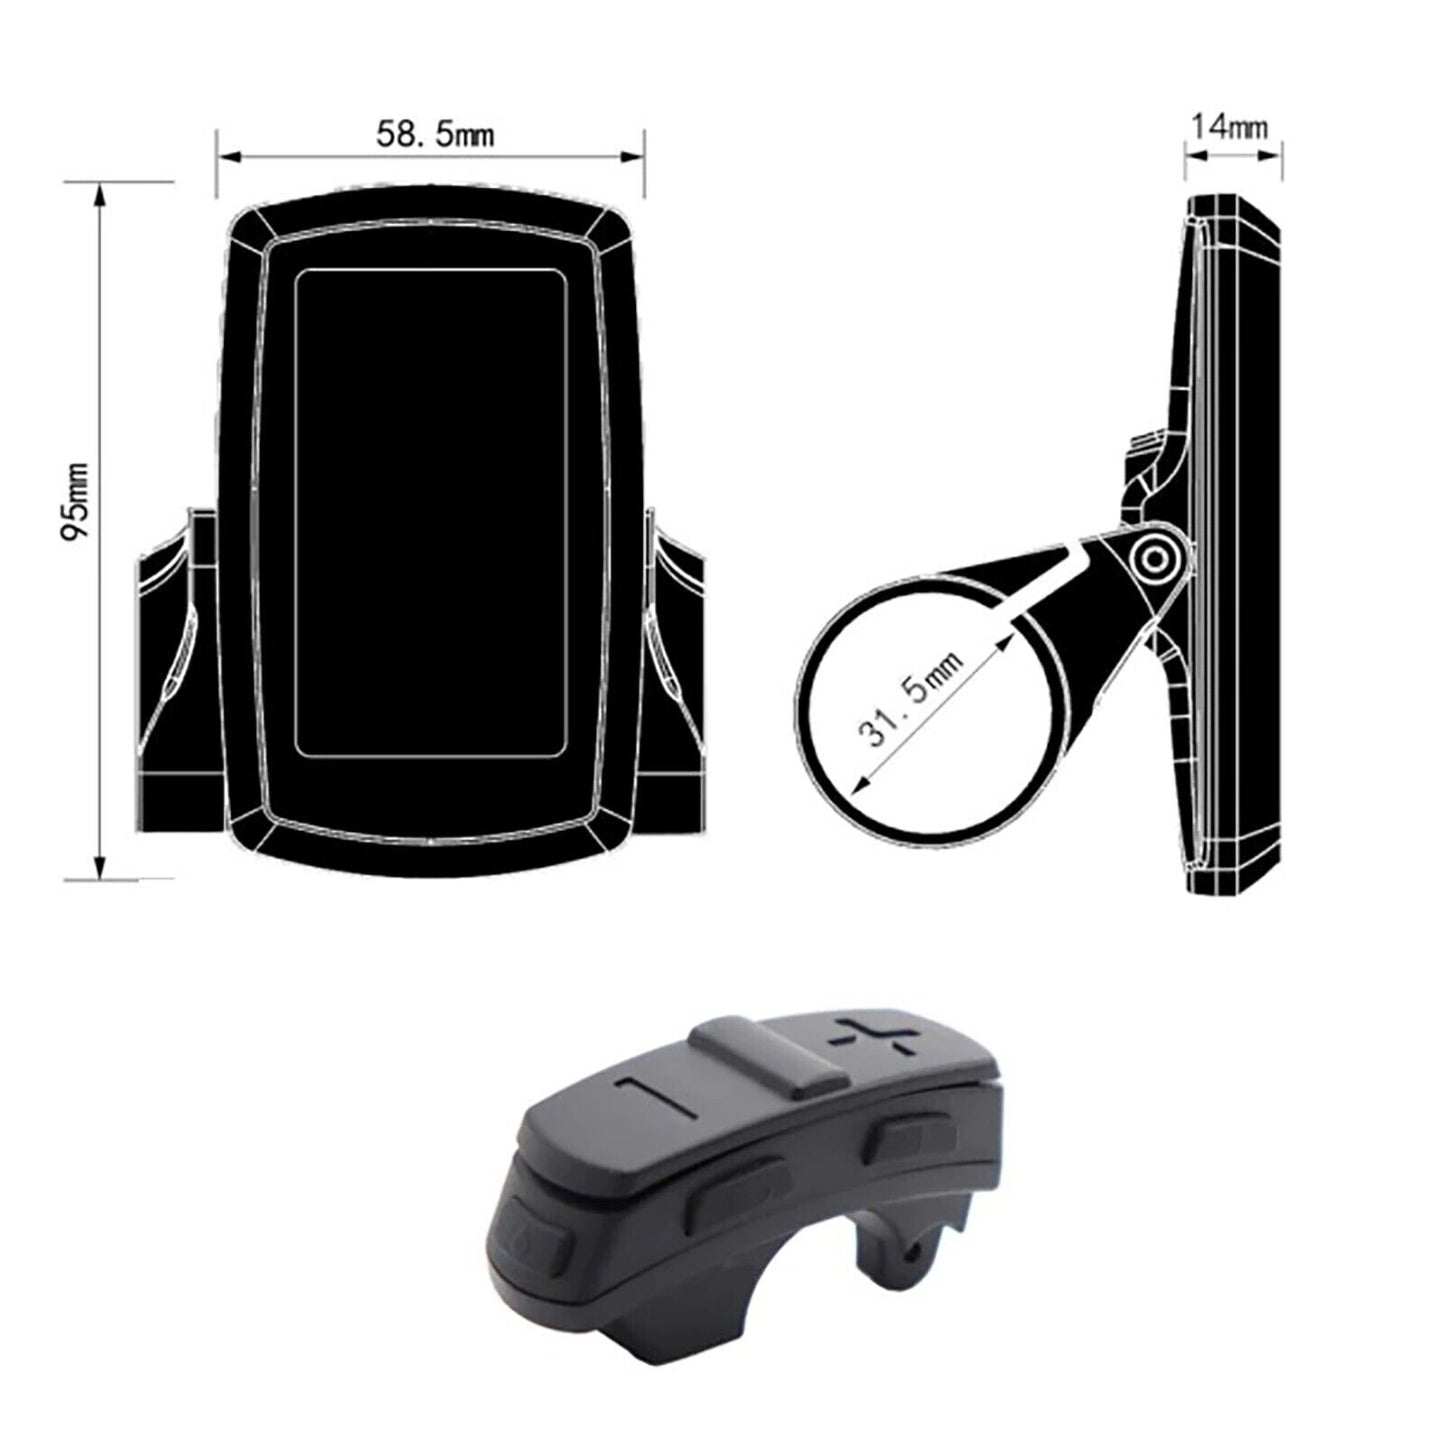 Presale - 1500W 26'' Inch EBike Bicycle Conversion Kit 48V, Samsung Cell 20A Battery